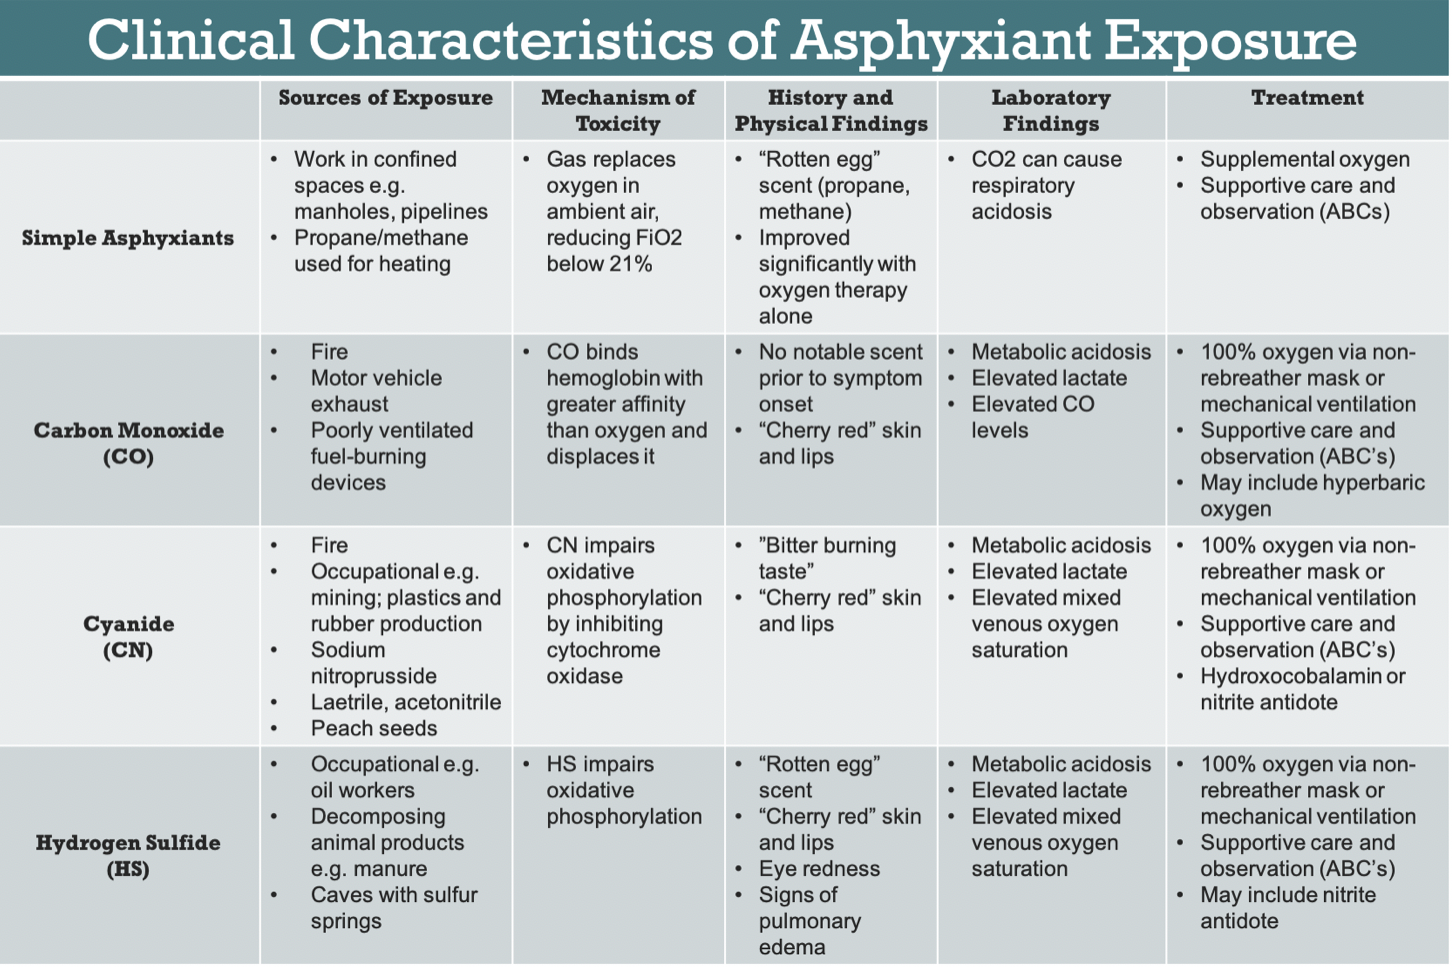 What is the most common chemical asphyxiant?